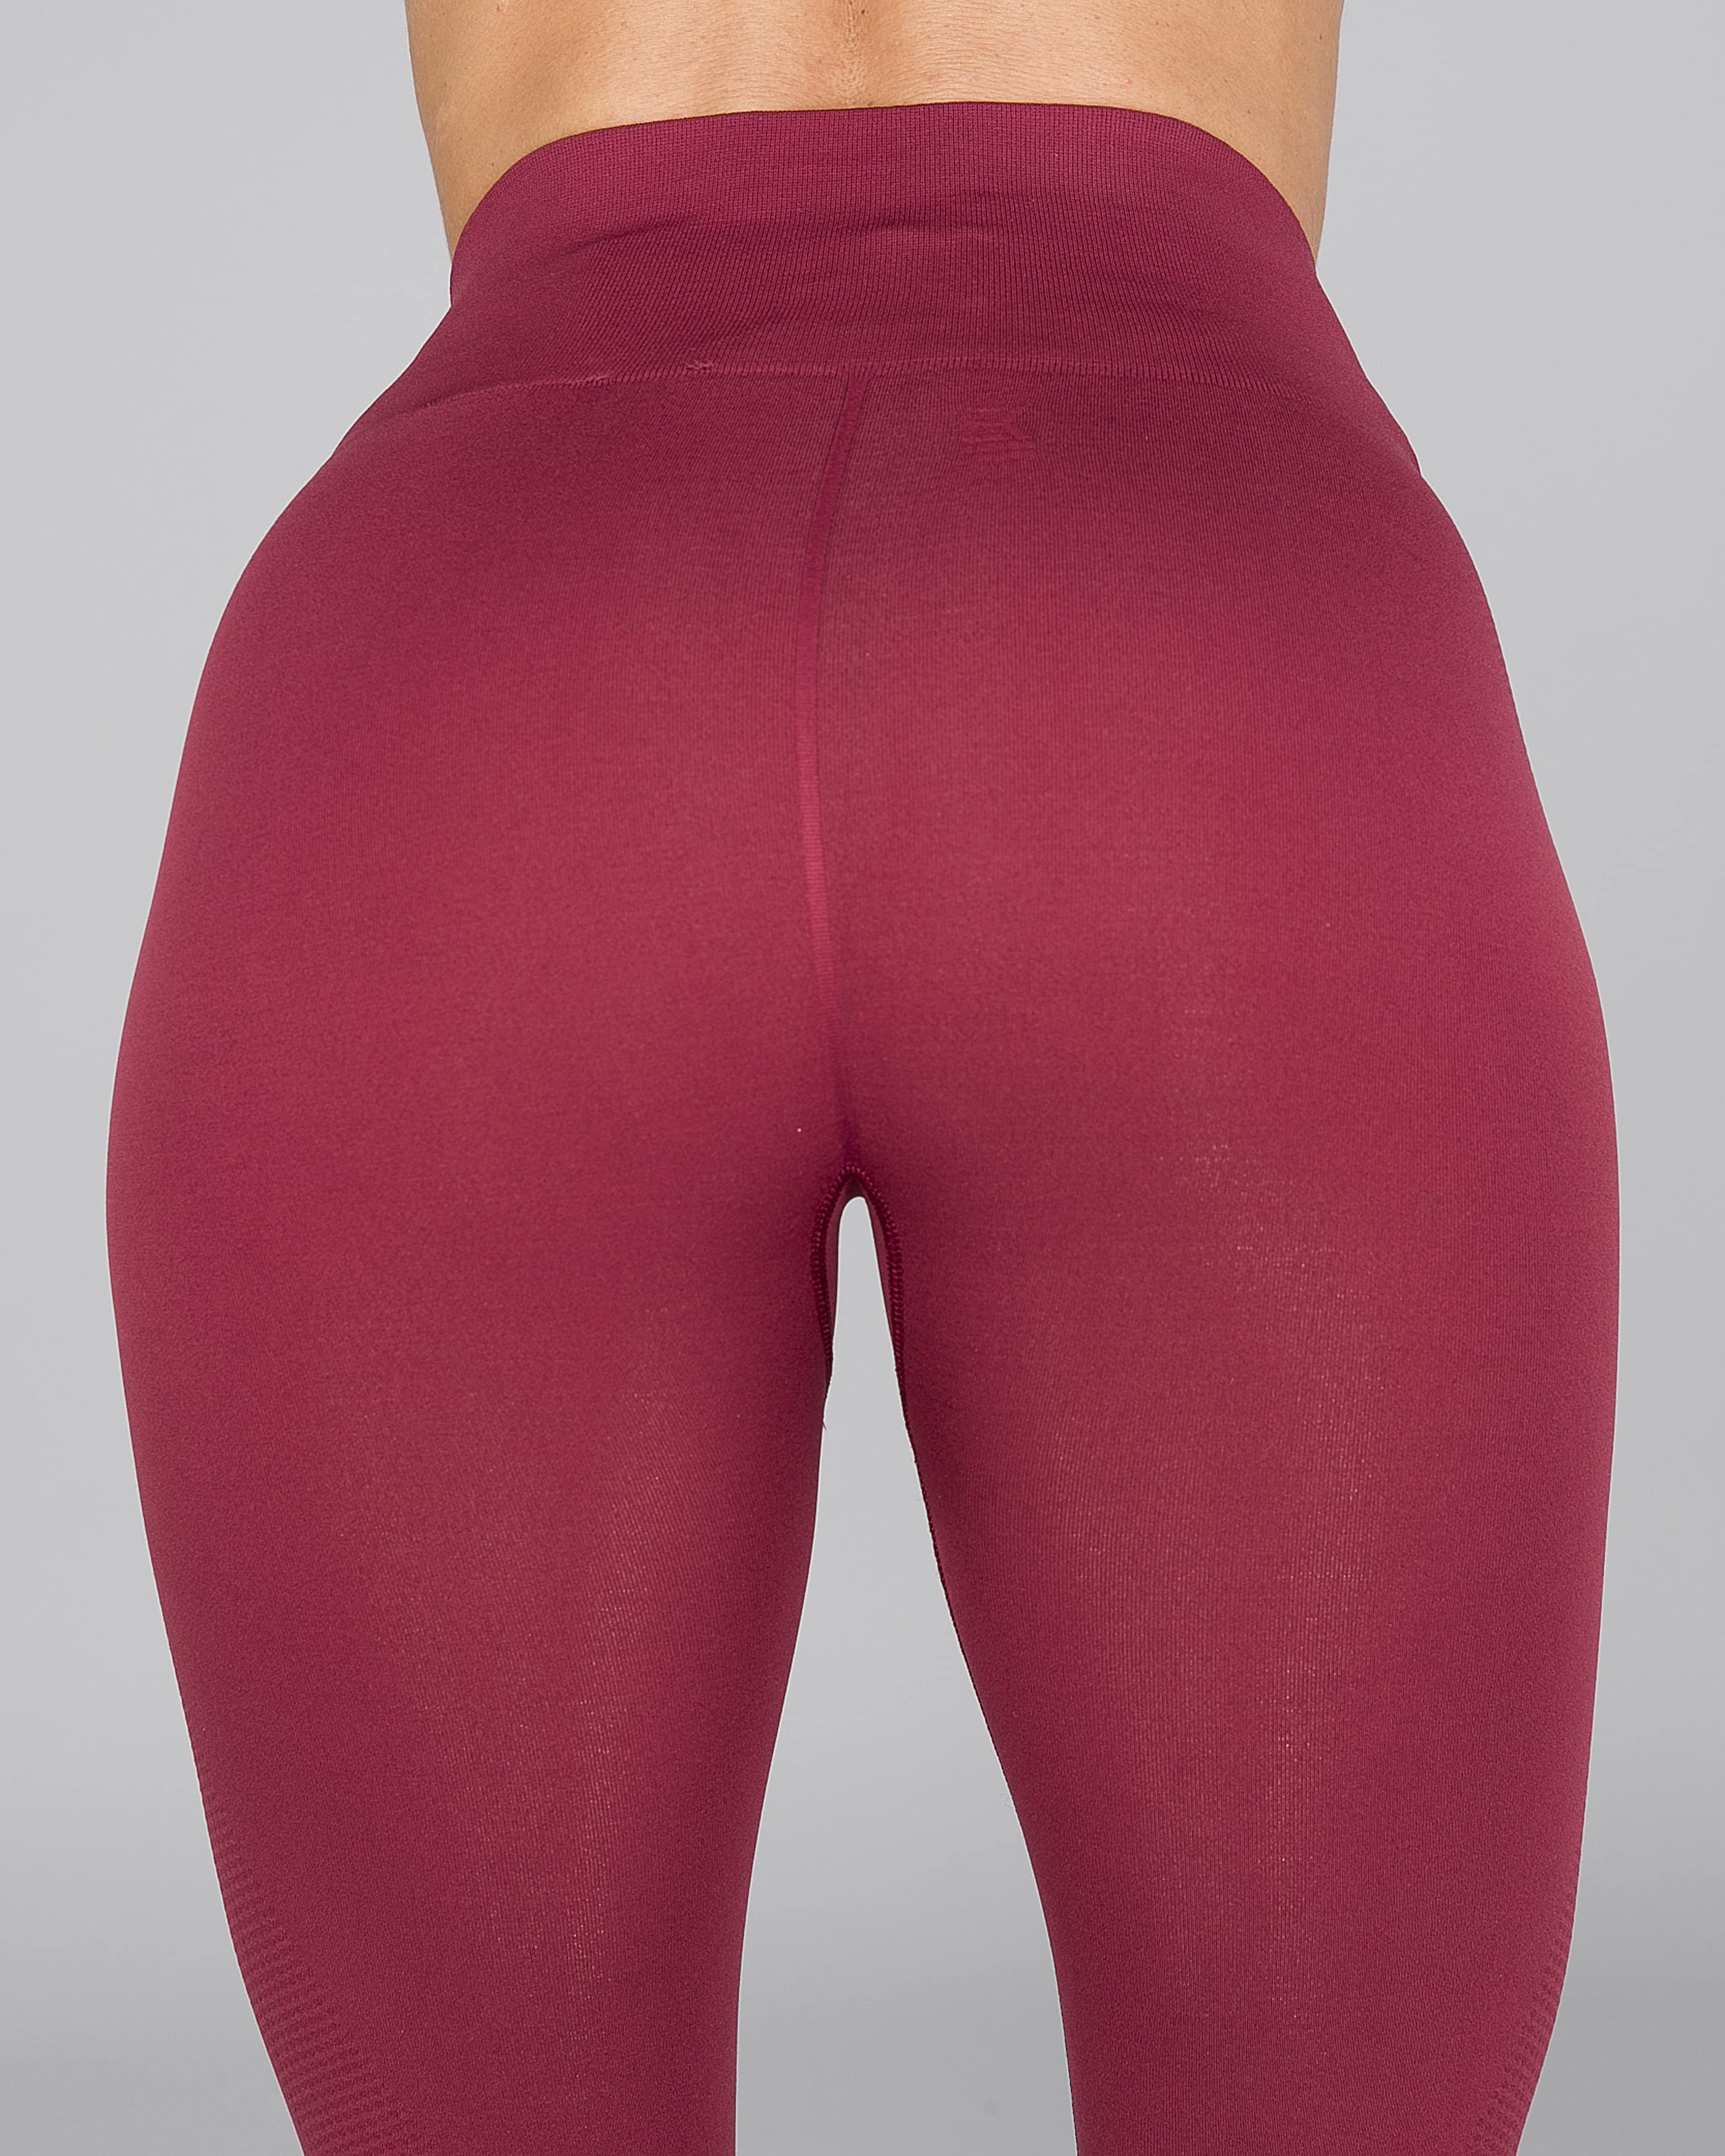 Better Bodies Rockaway Tights - Limited Edition Sangria Red 